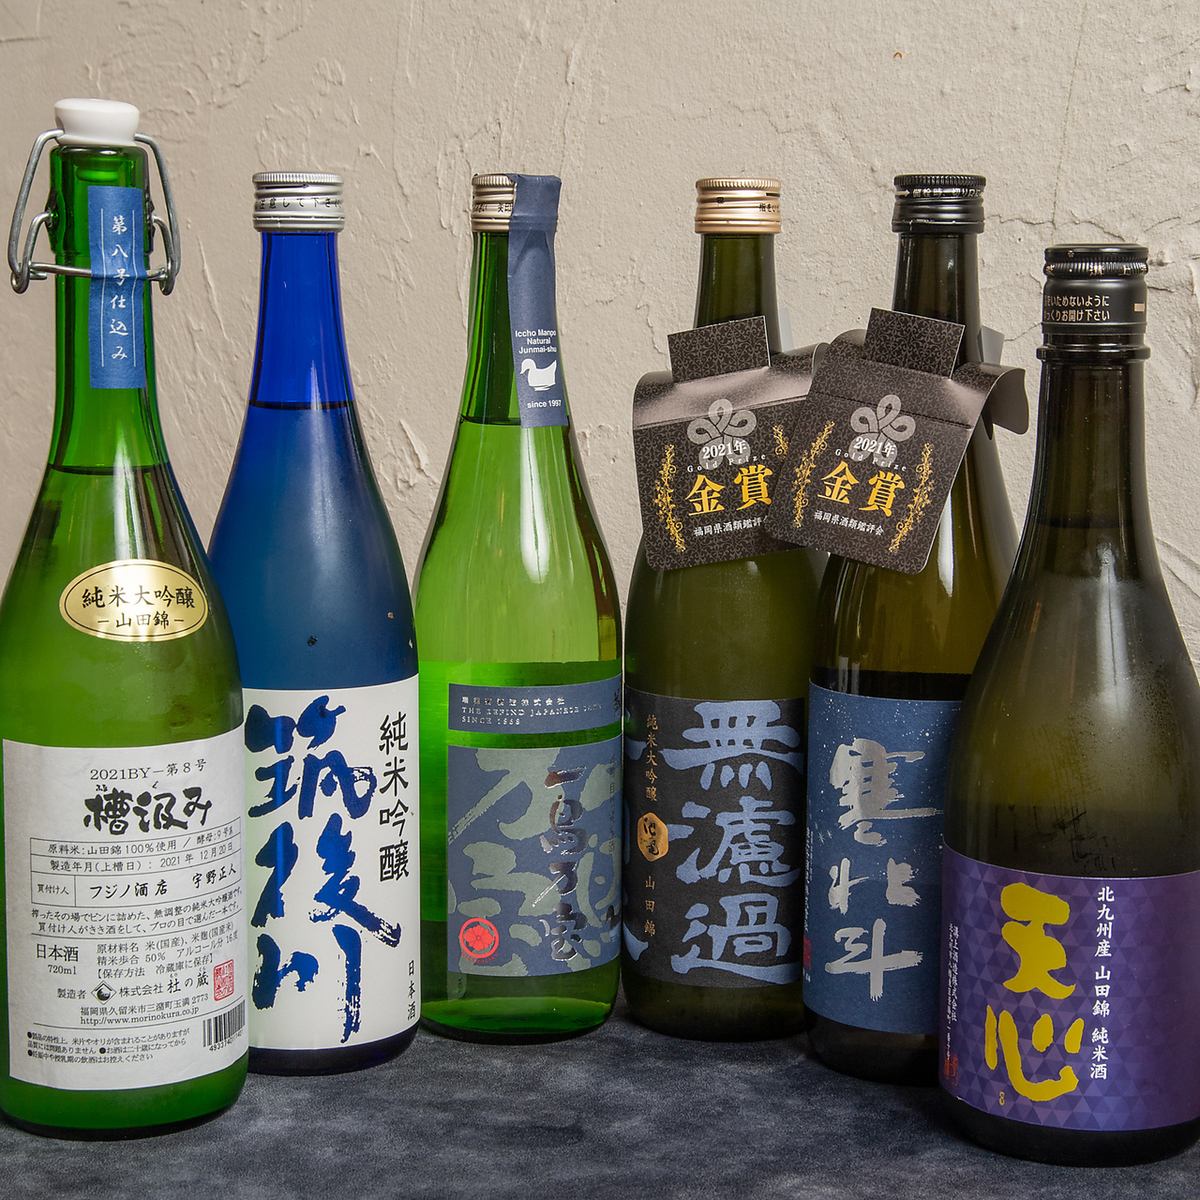 You can buy and enjoy your favorite sake at the liquor store! Fukuoka local sake is recommended ◎